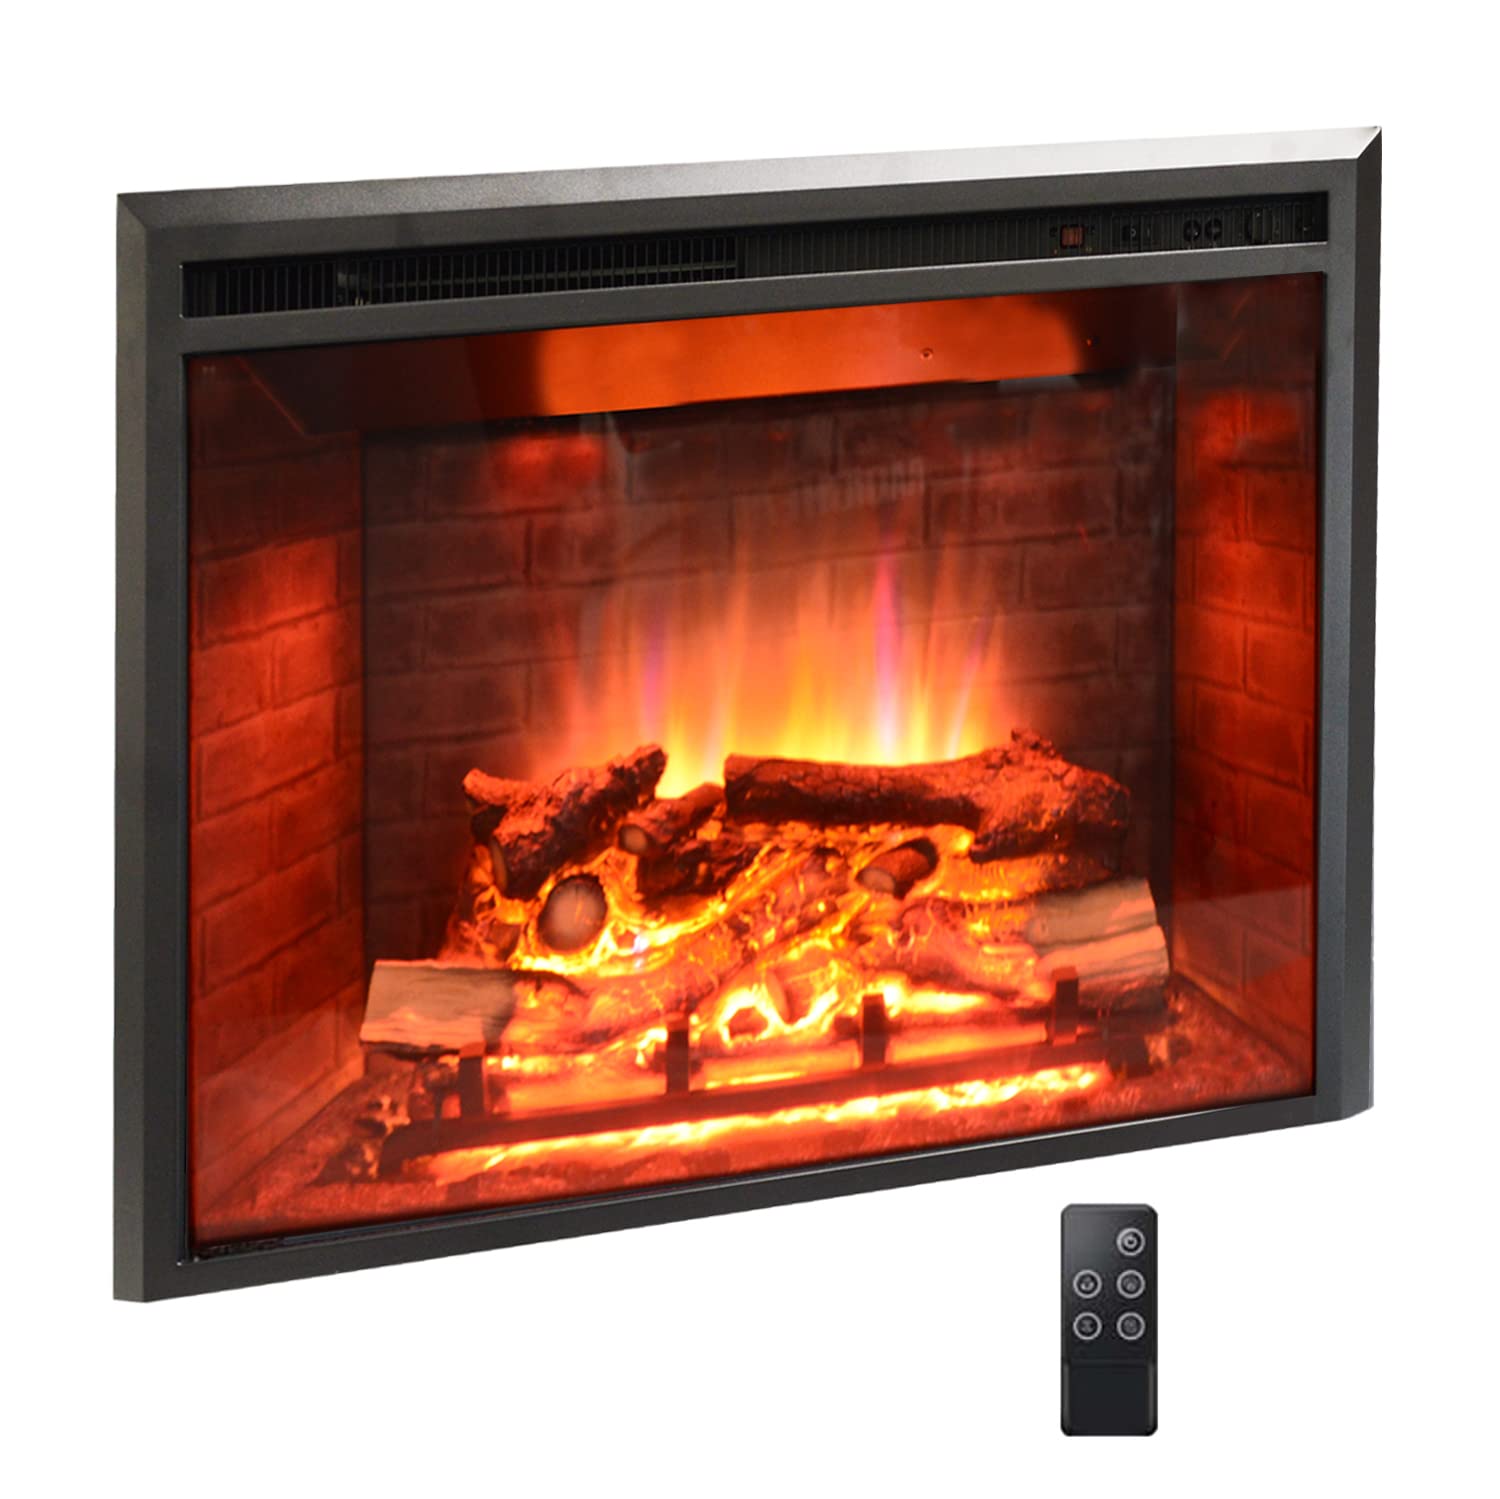 32 inch Electric Fireplace Insert, Heater, Recessed Mounted with Weathered Concrete Interior, 750/1500W, Black